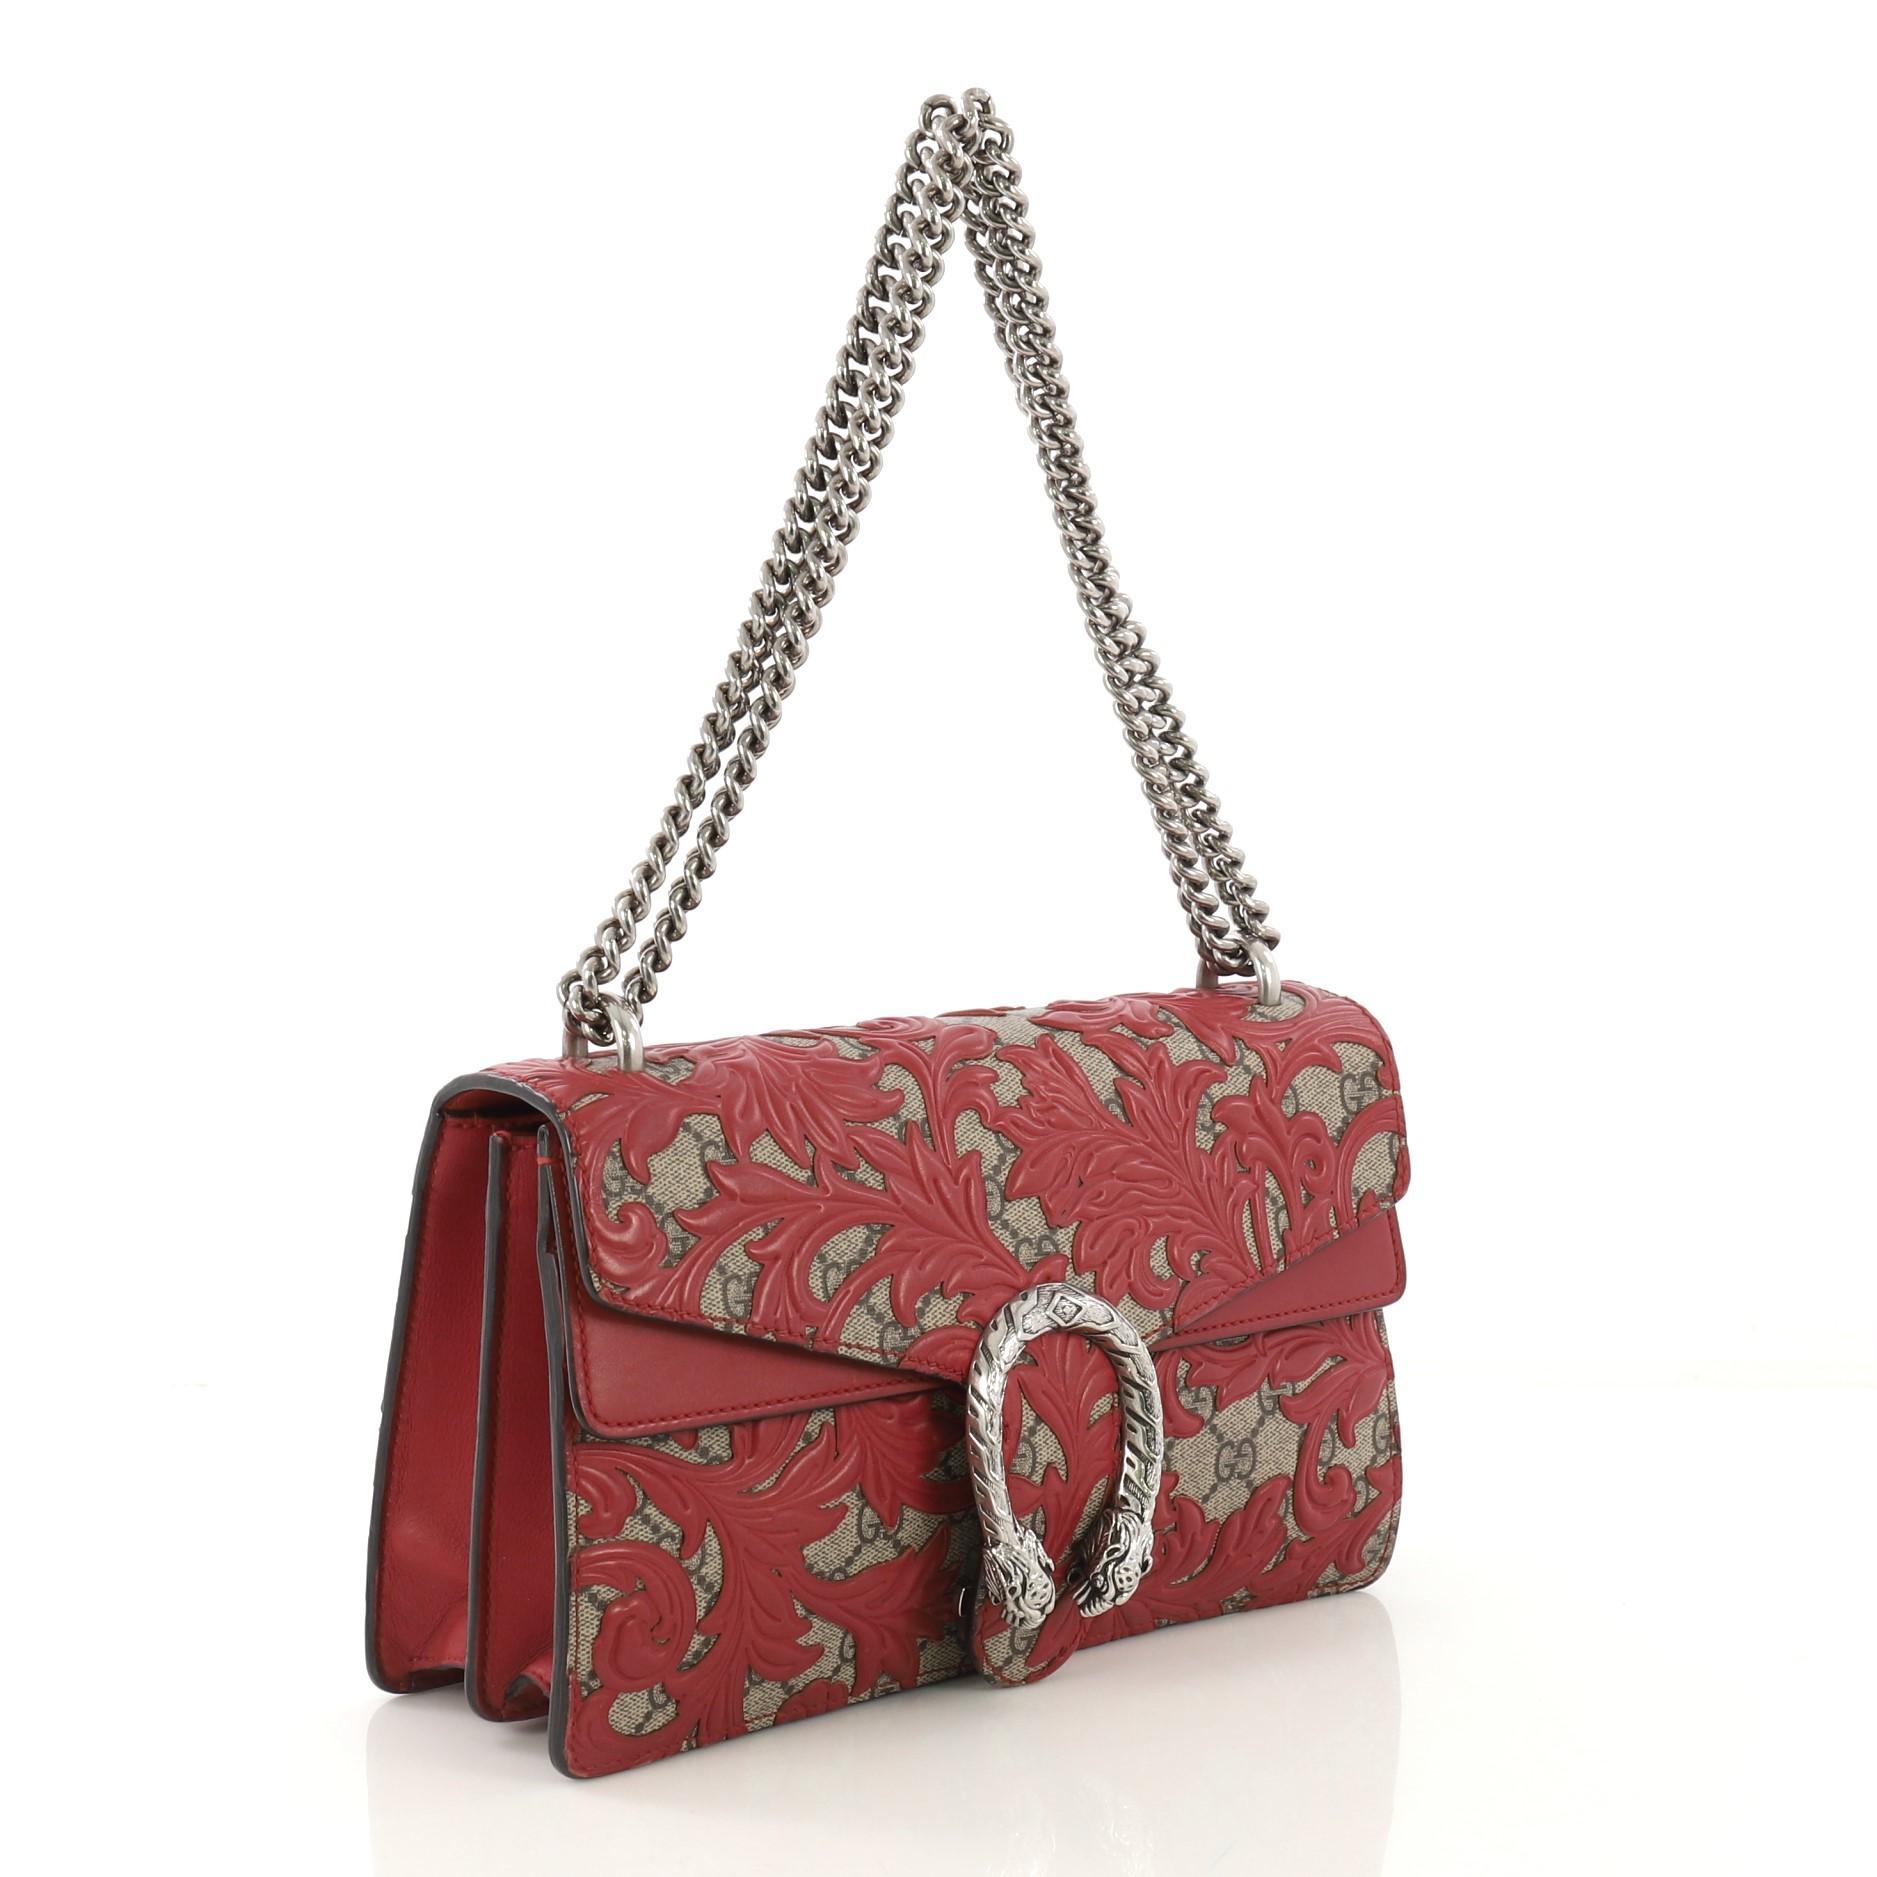 This Gucci Dionysus Bag Arabesque GG Coated Canvas Small, crafted from brown GG monogram coated canvas and red leather, features a chain link strap, embellished tiger head spur detail on its flap, accordion-like gusseted sides, and aged silver-tone